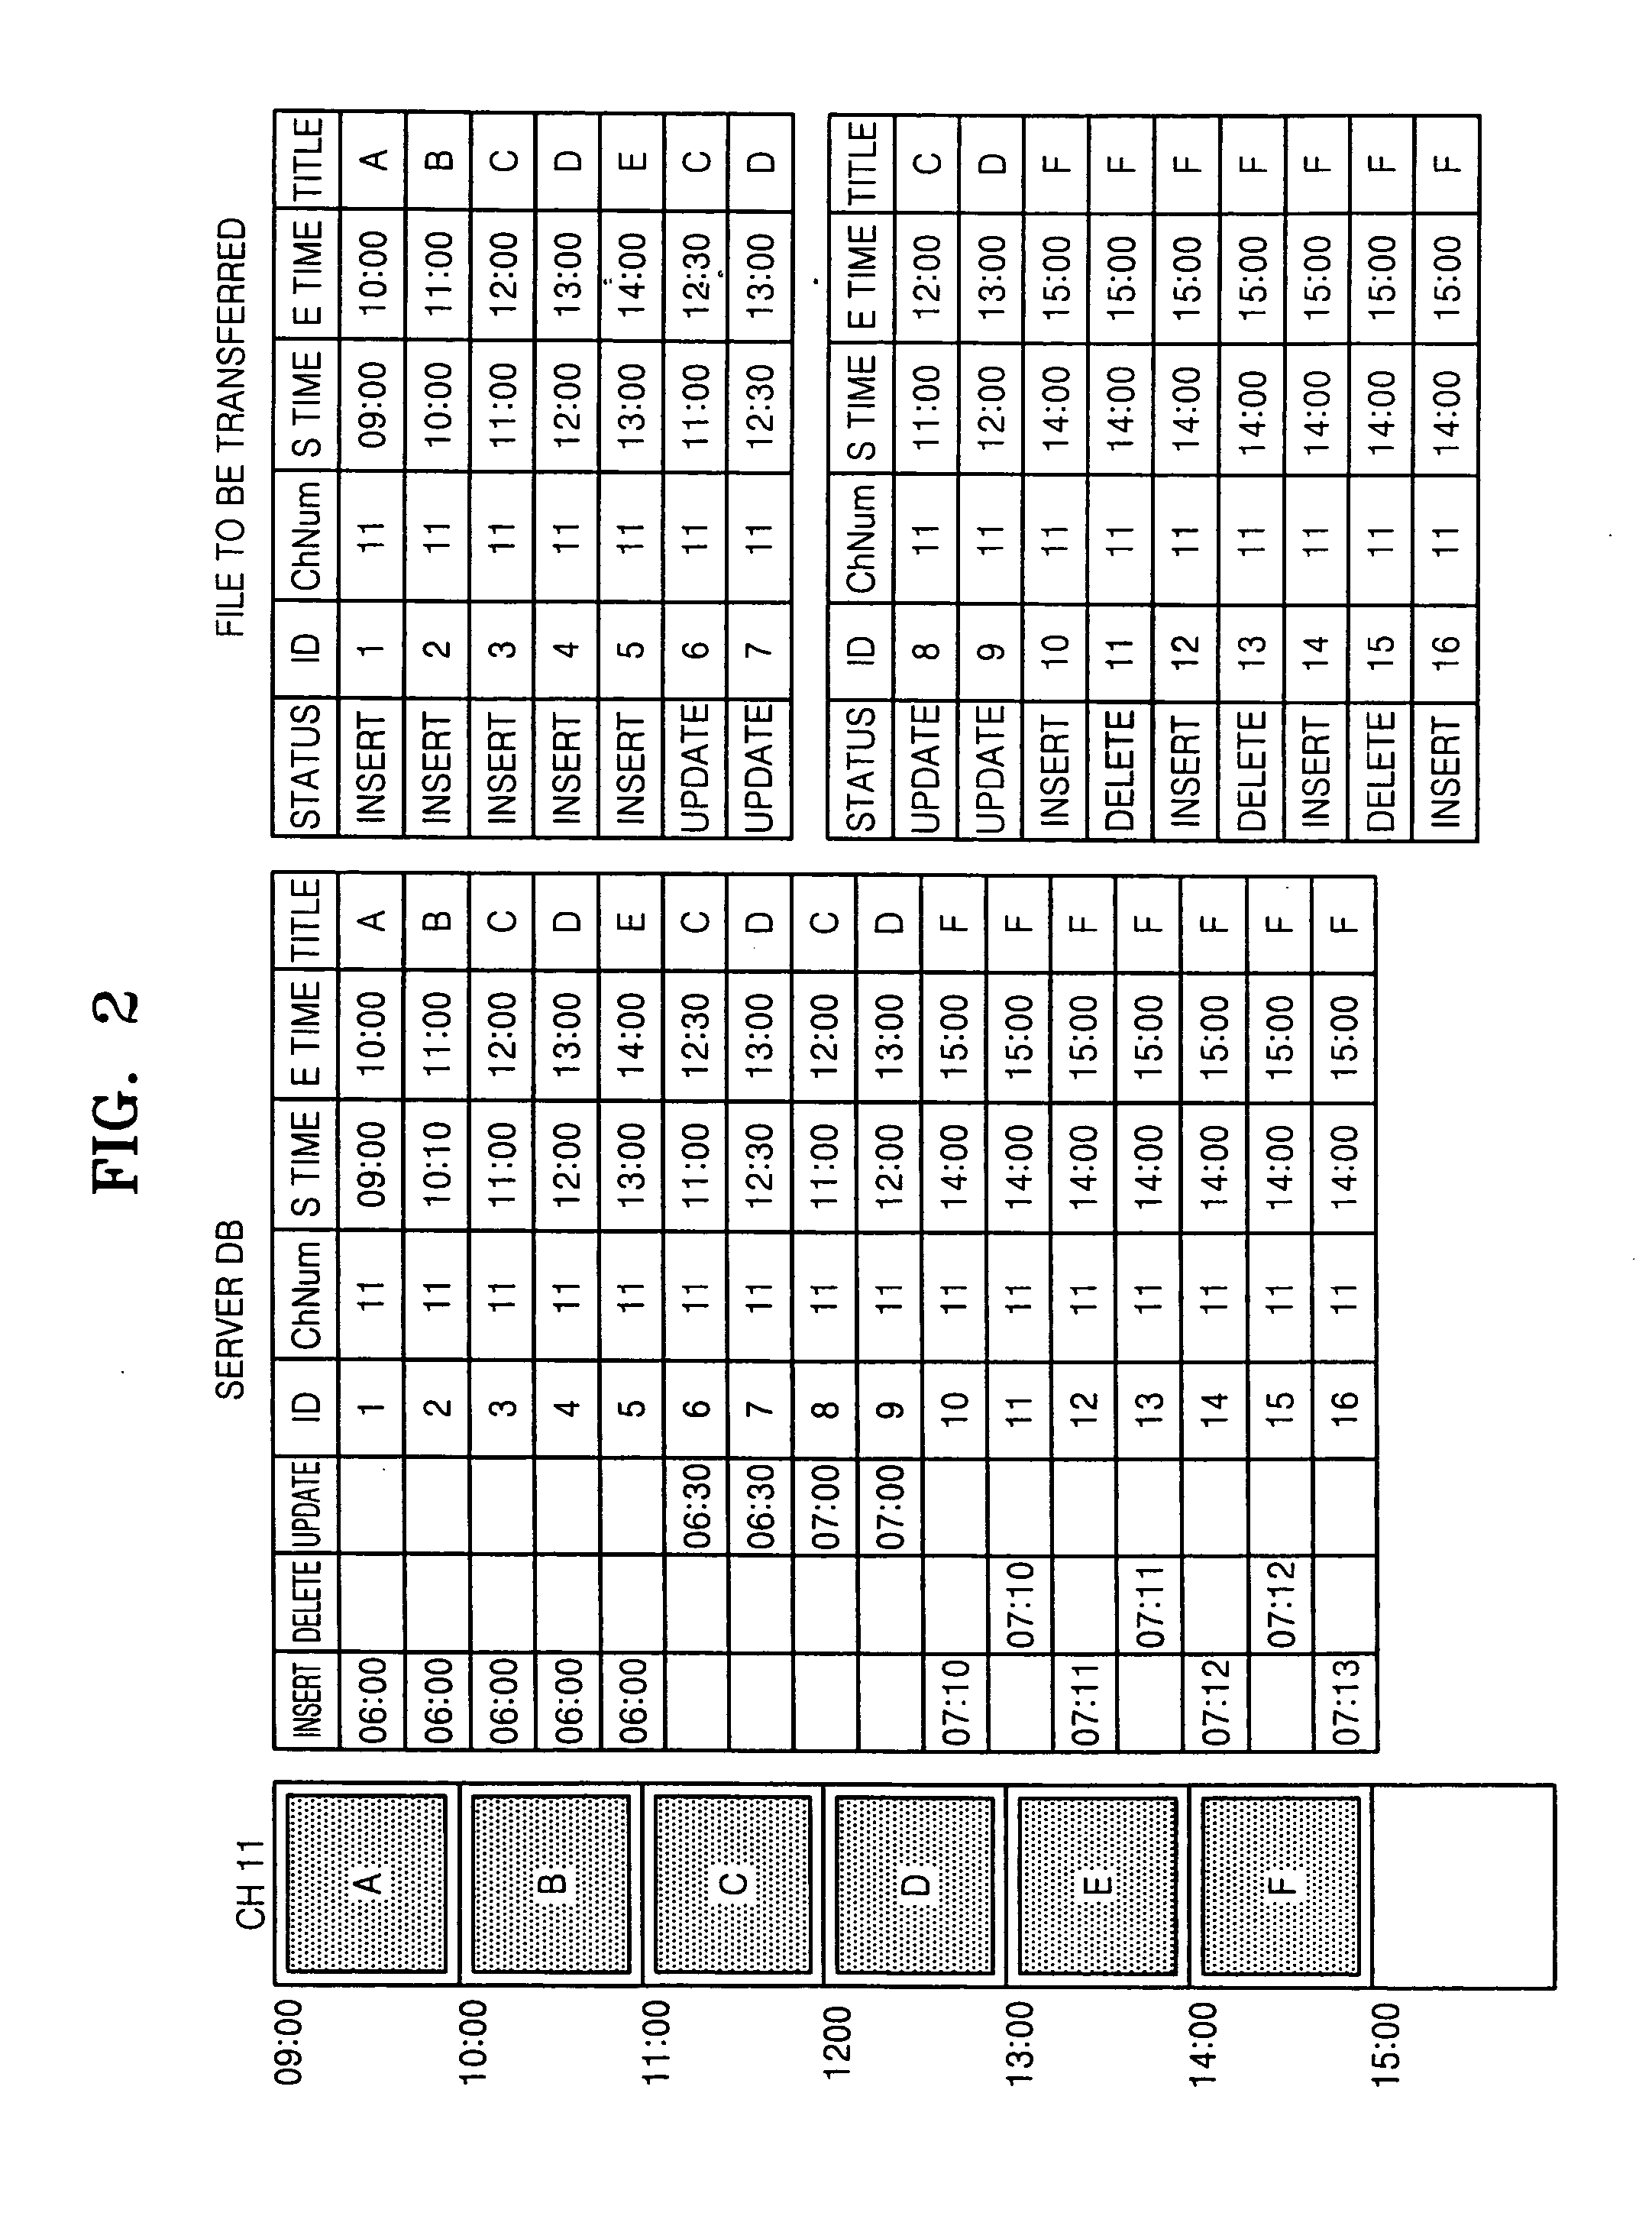 Method and apparatus for synchronizing EPG information between server and client